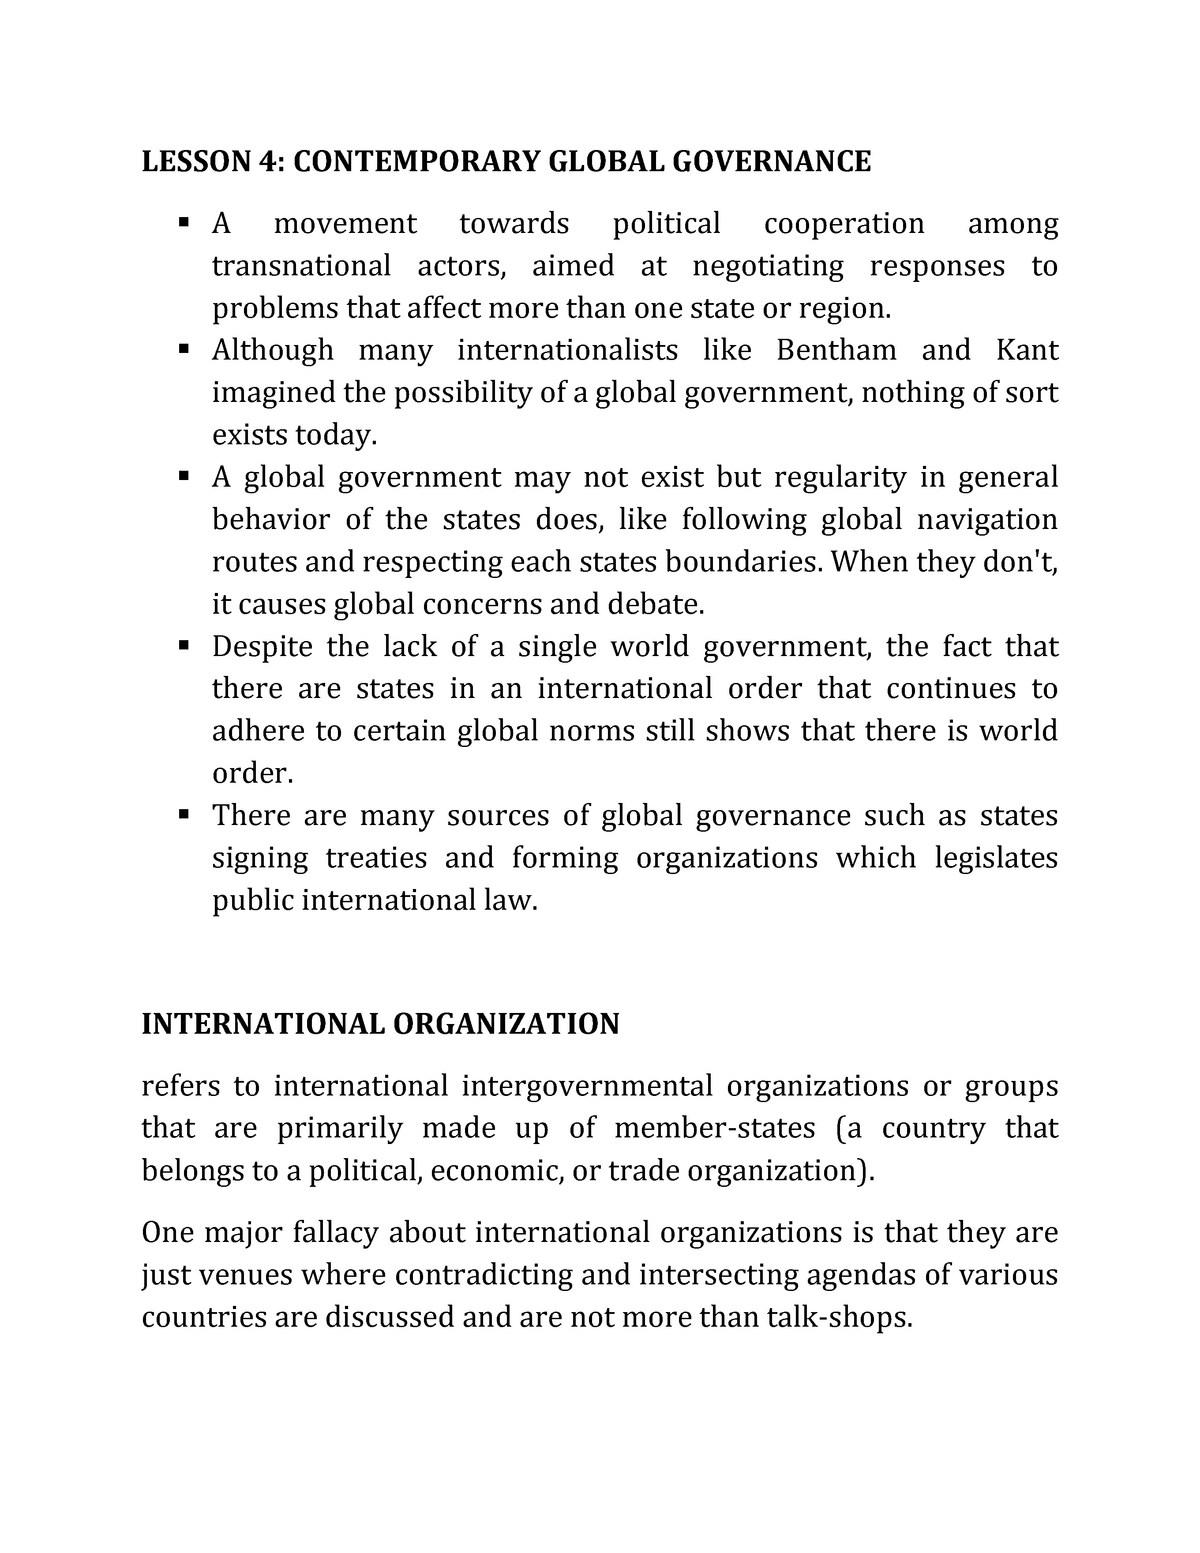 thesis in global governance